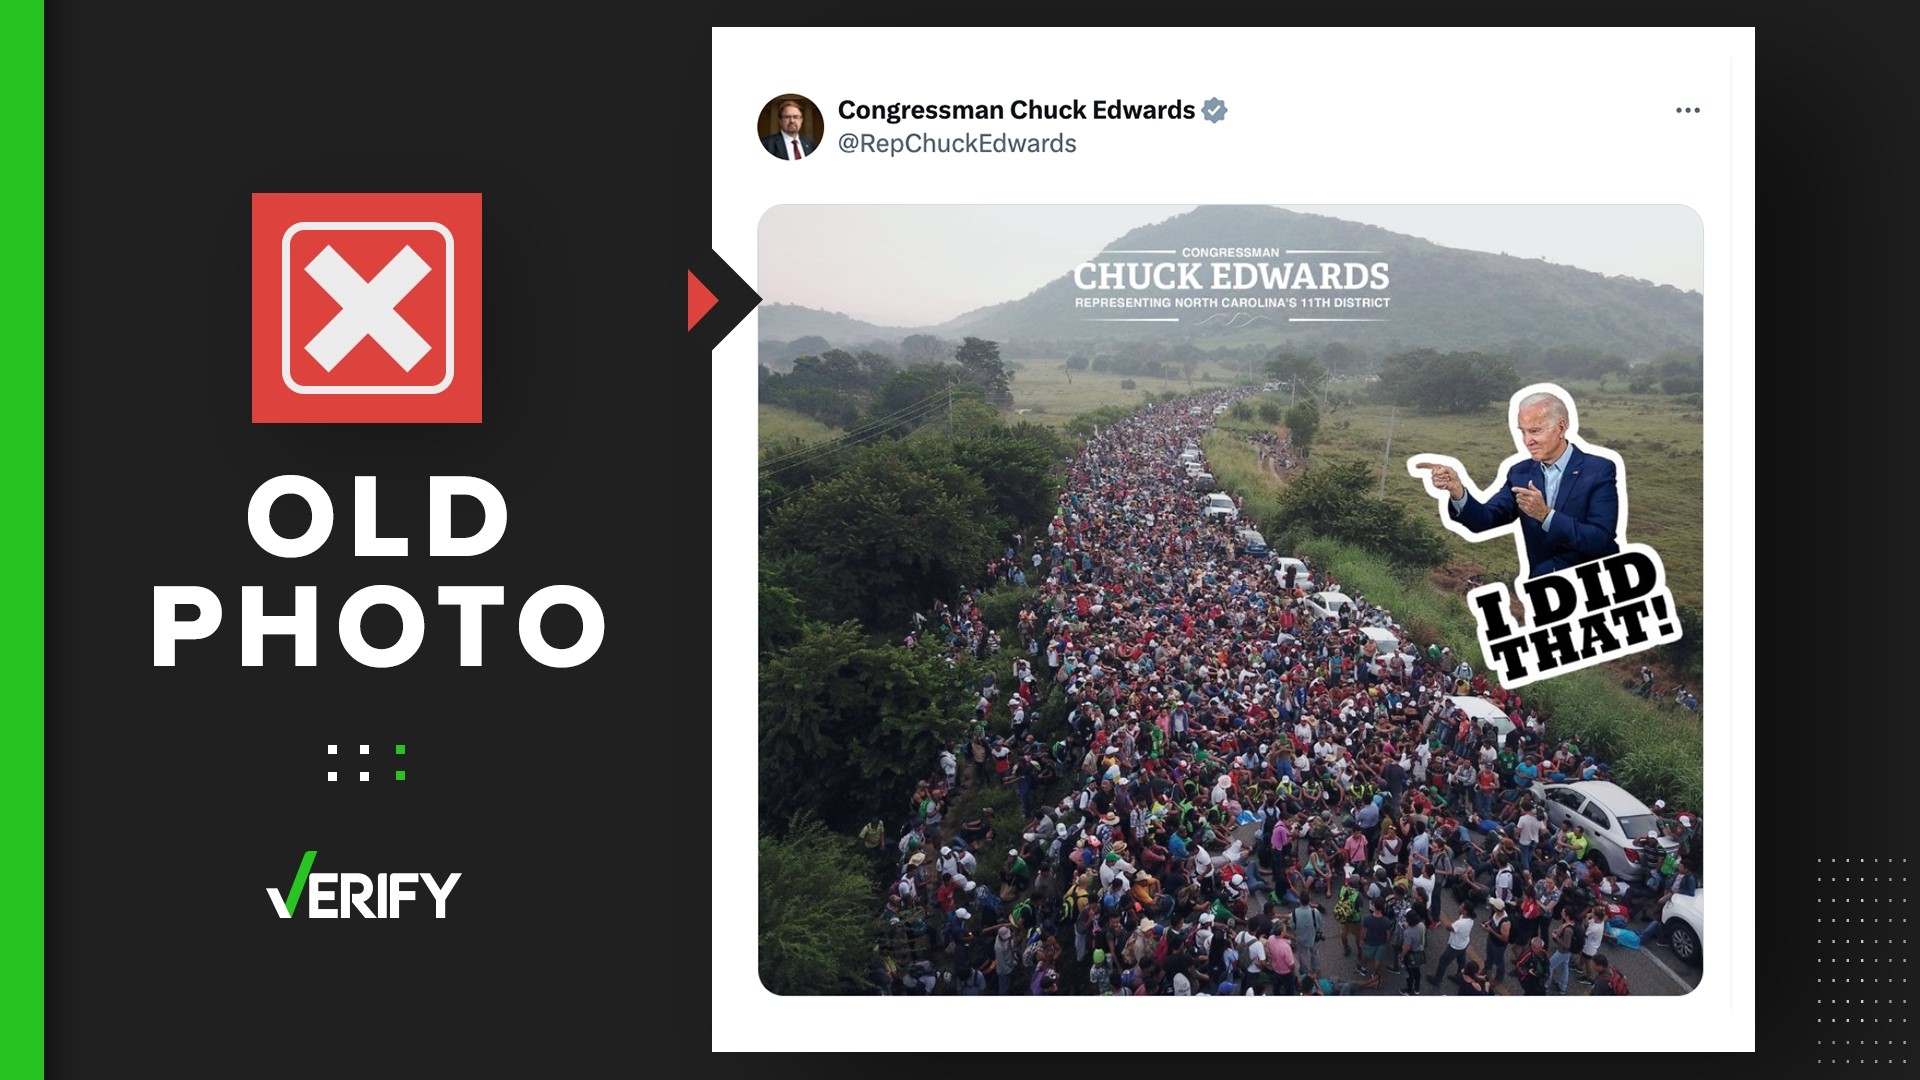 A photo shared by Rep. Chuck Edwards (R-N.C.) appearing to show a migrant caravan includes an “I Did That” Biden meme. But the photo predates Biden’s presidency.